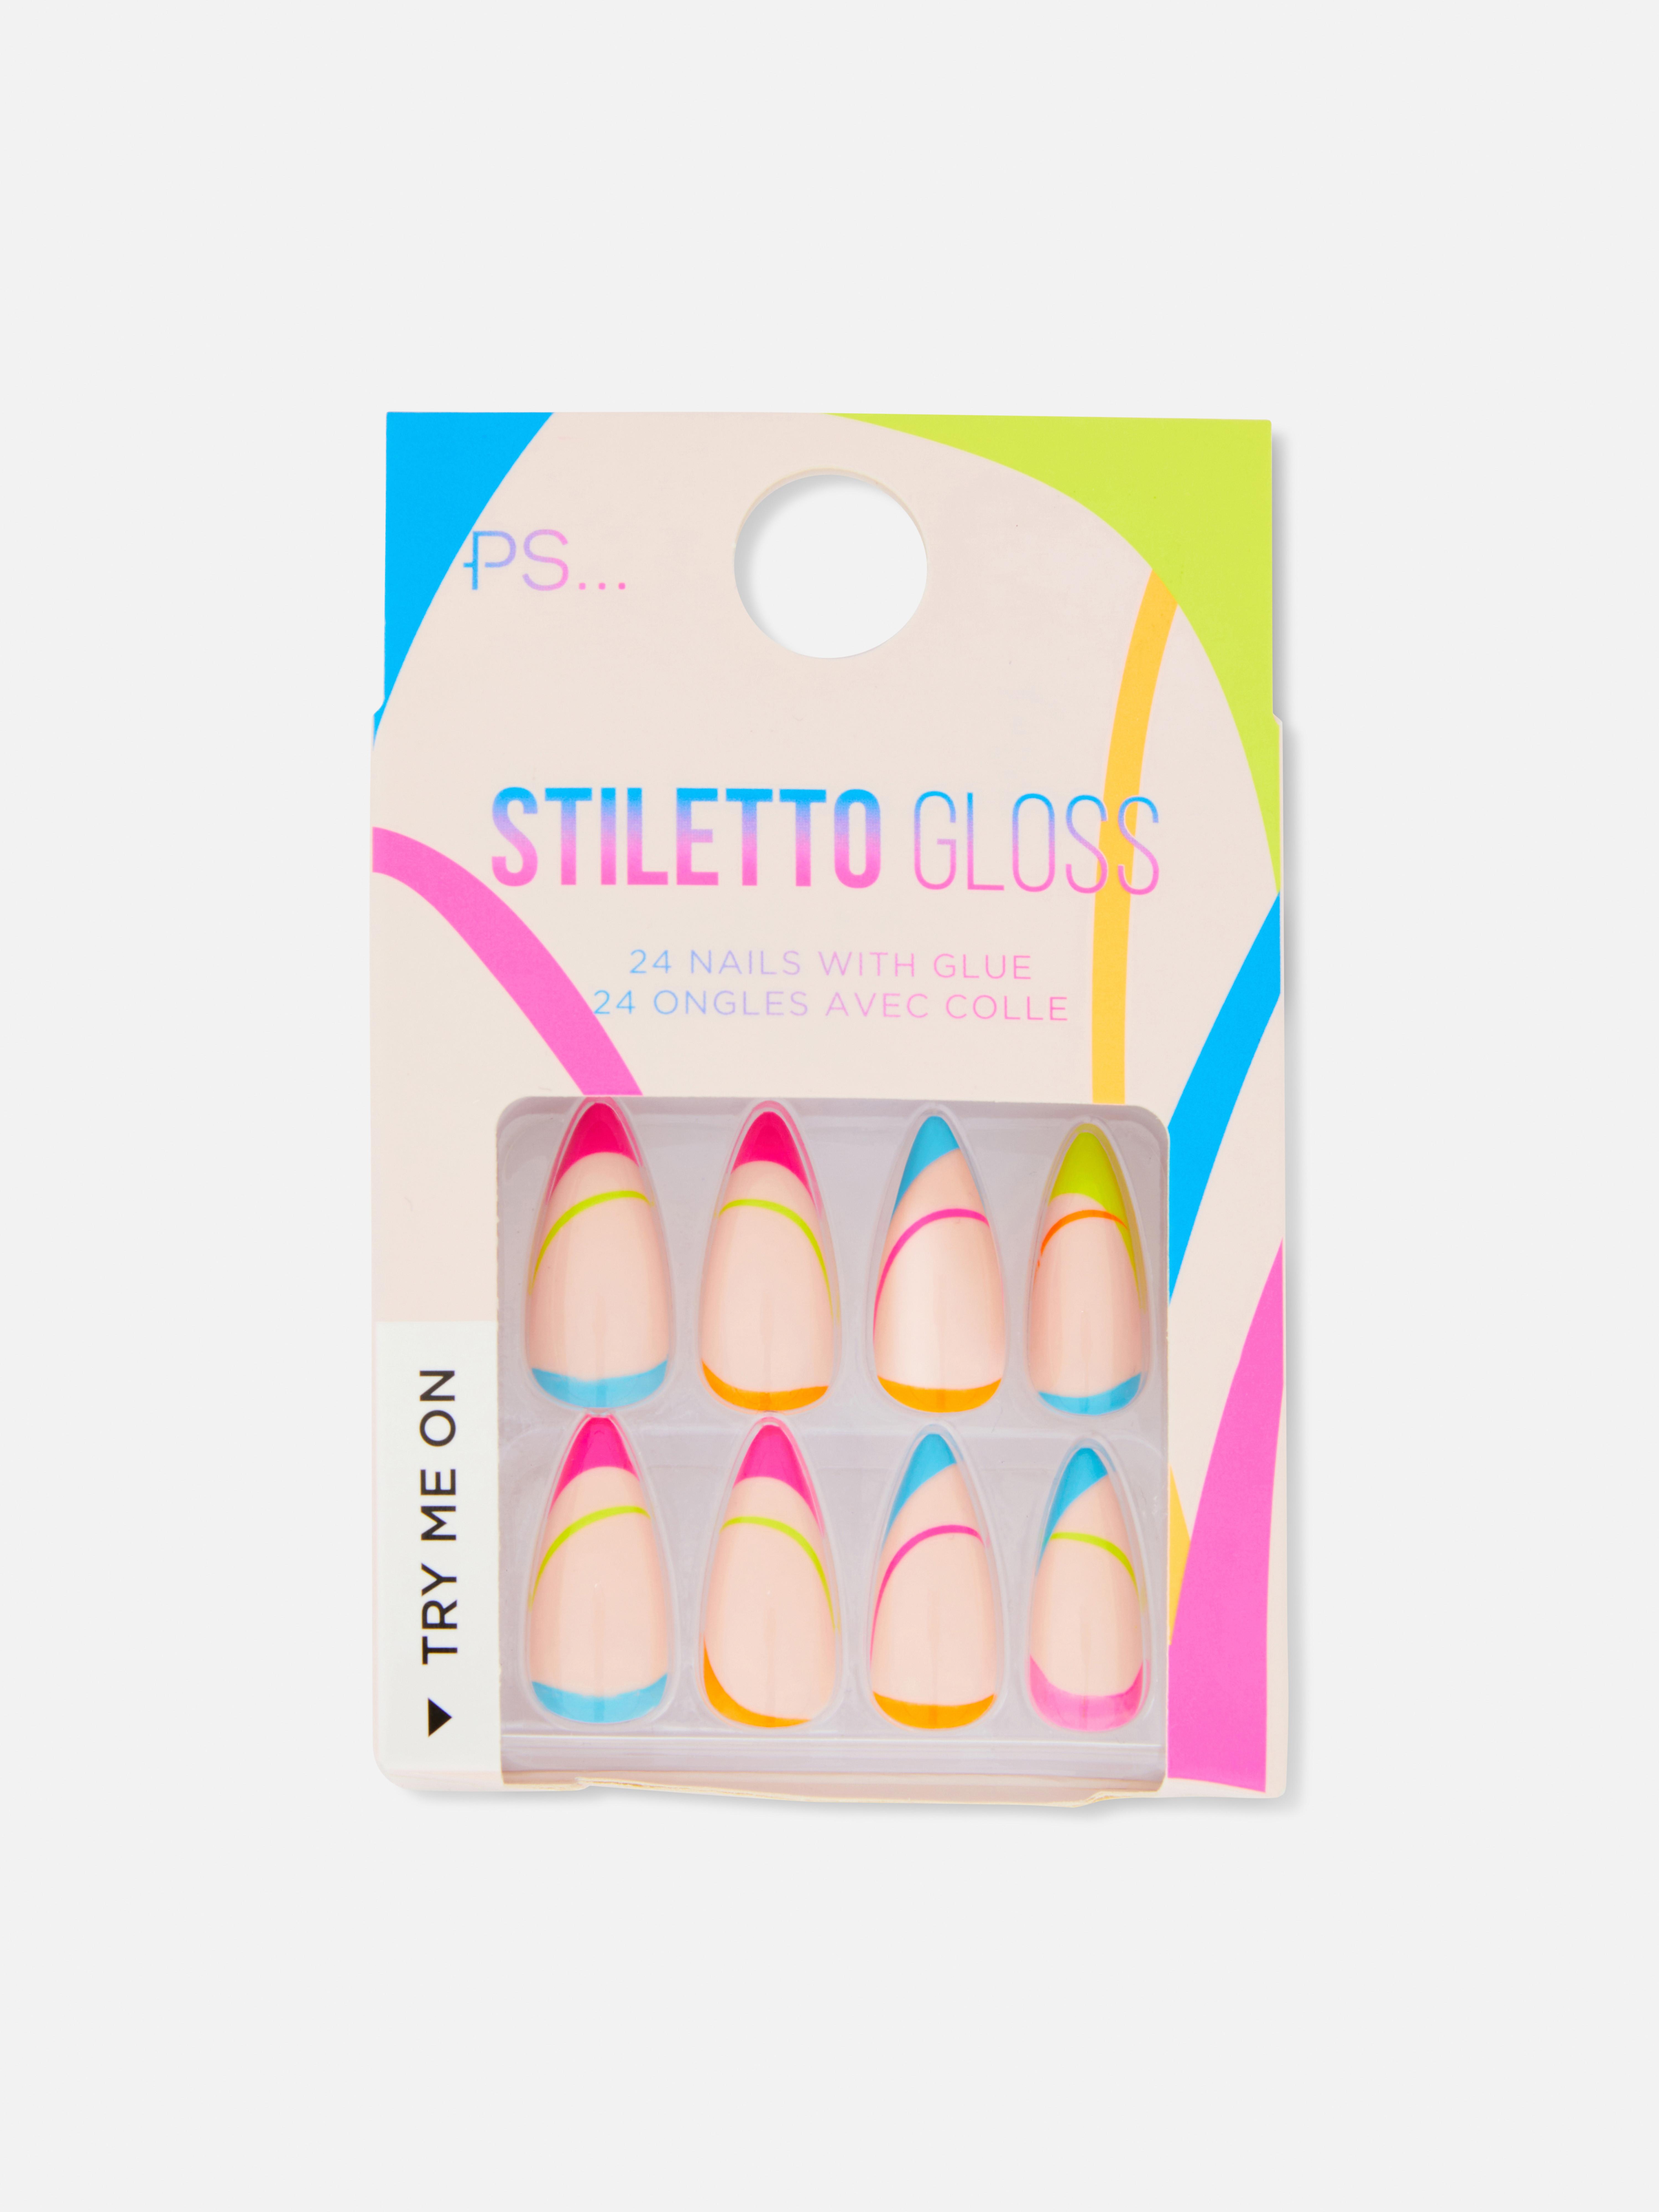 PS Stiletto Gloss Faux Nails